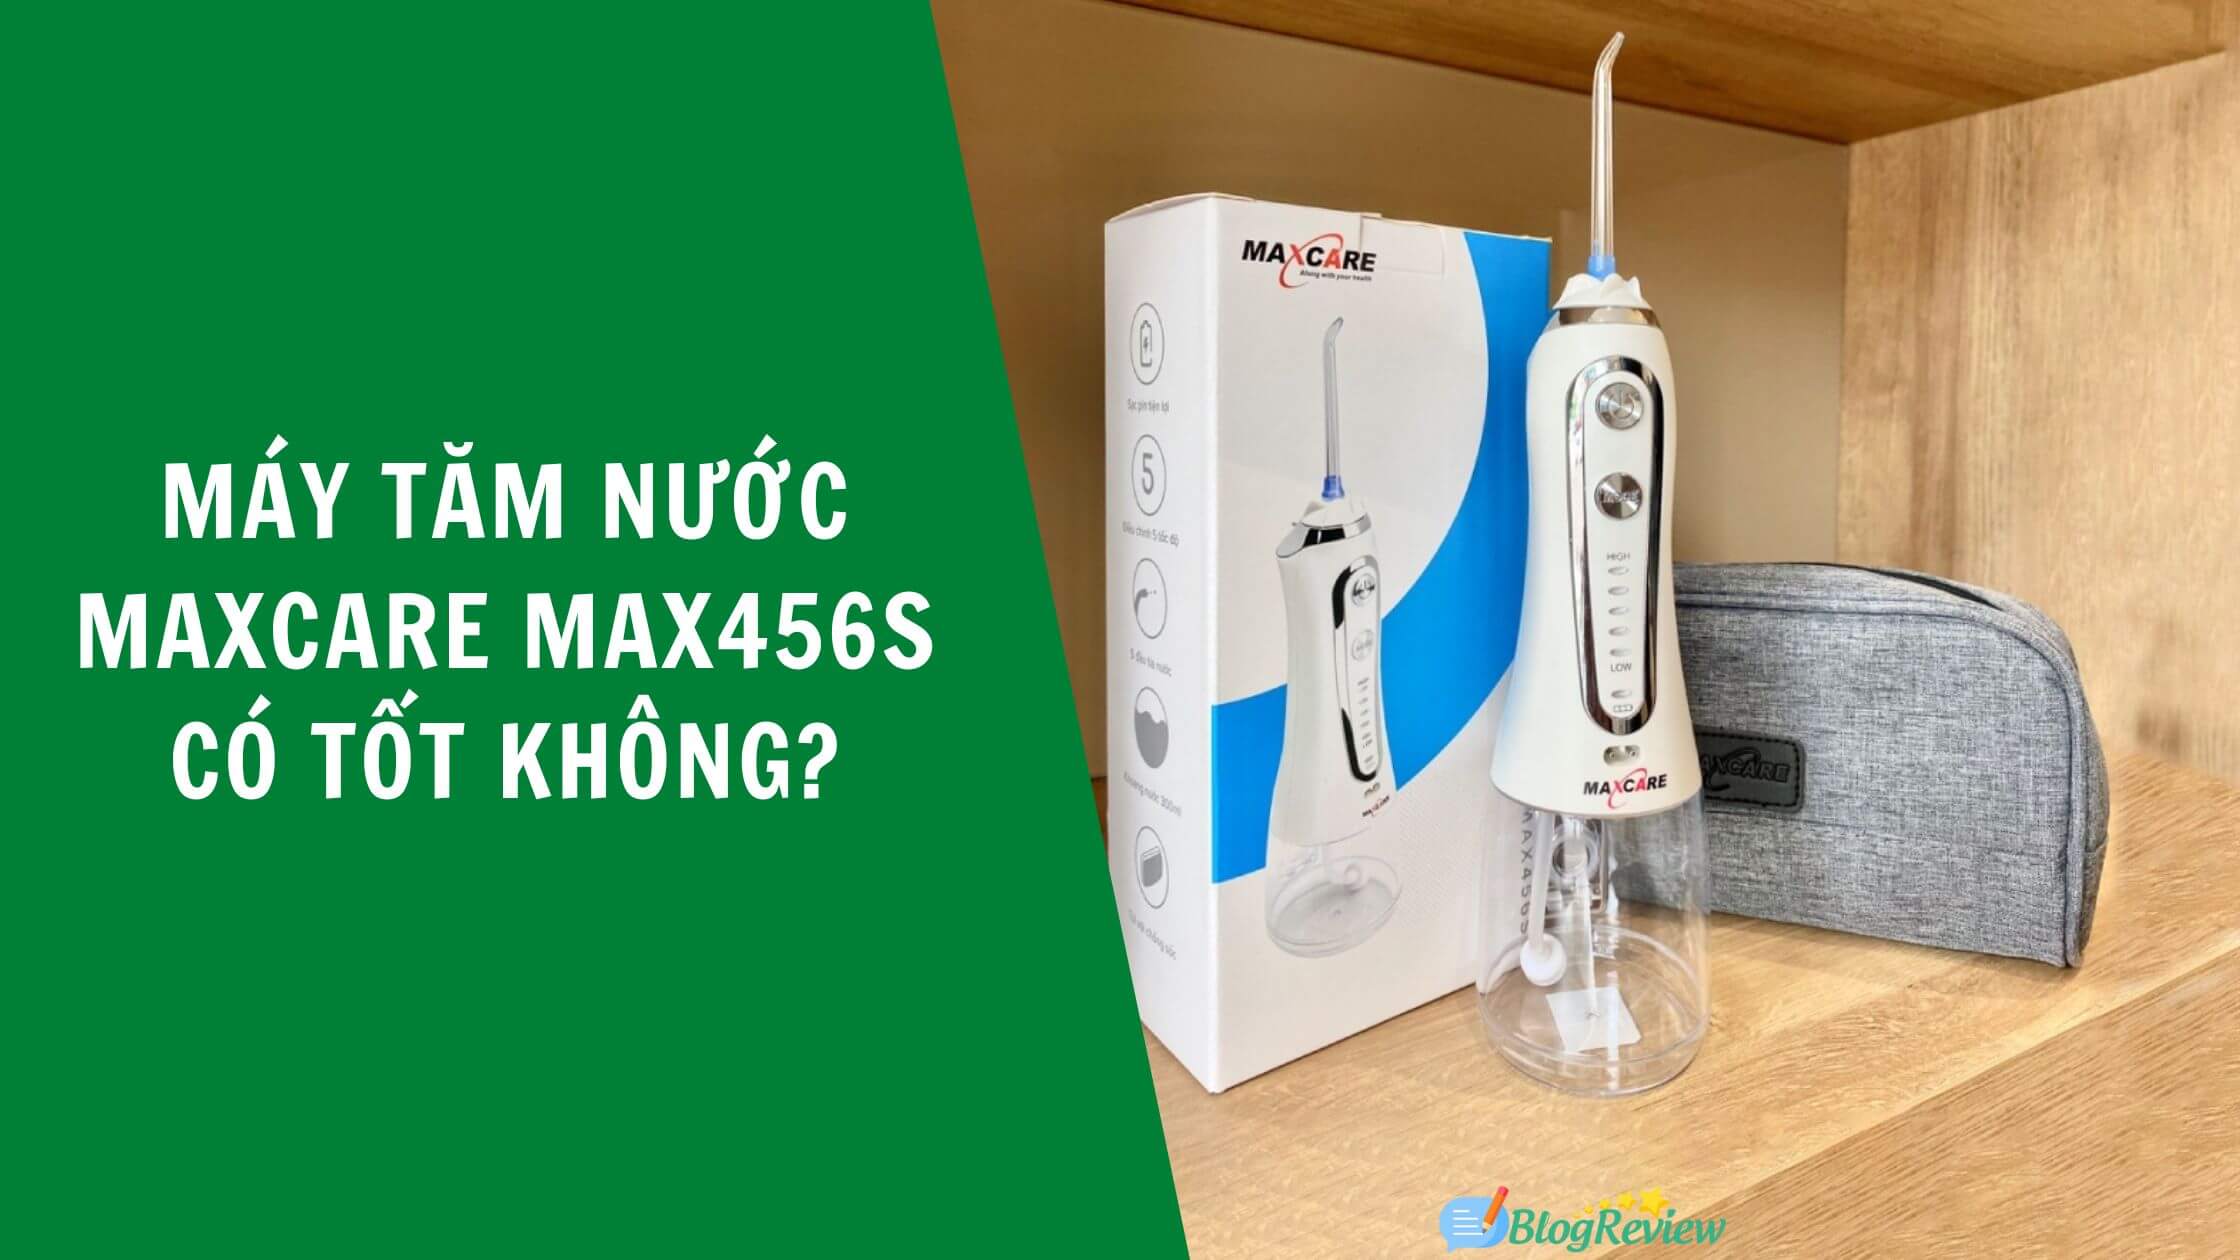 May Tam Nuoc Maxcare Max456s 5